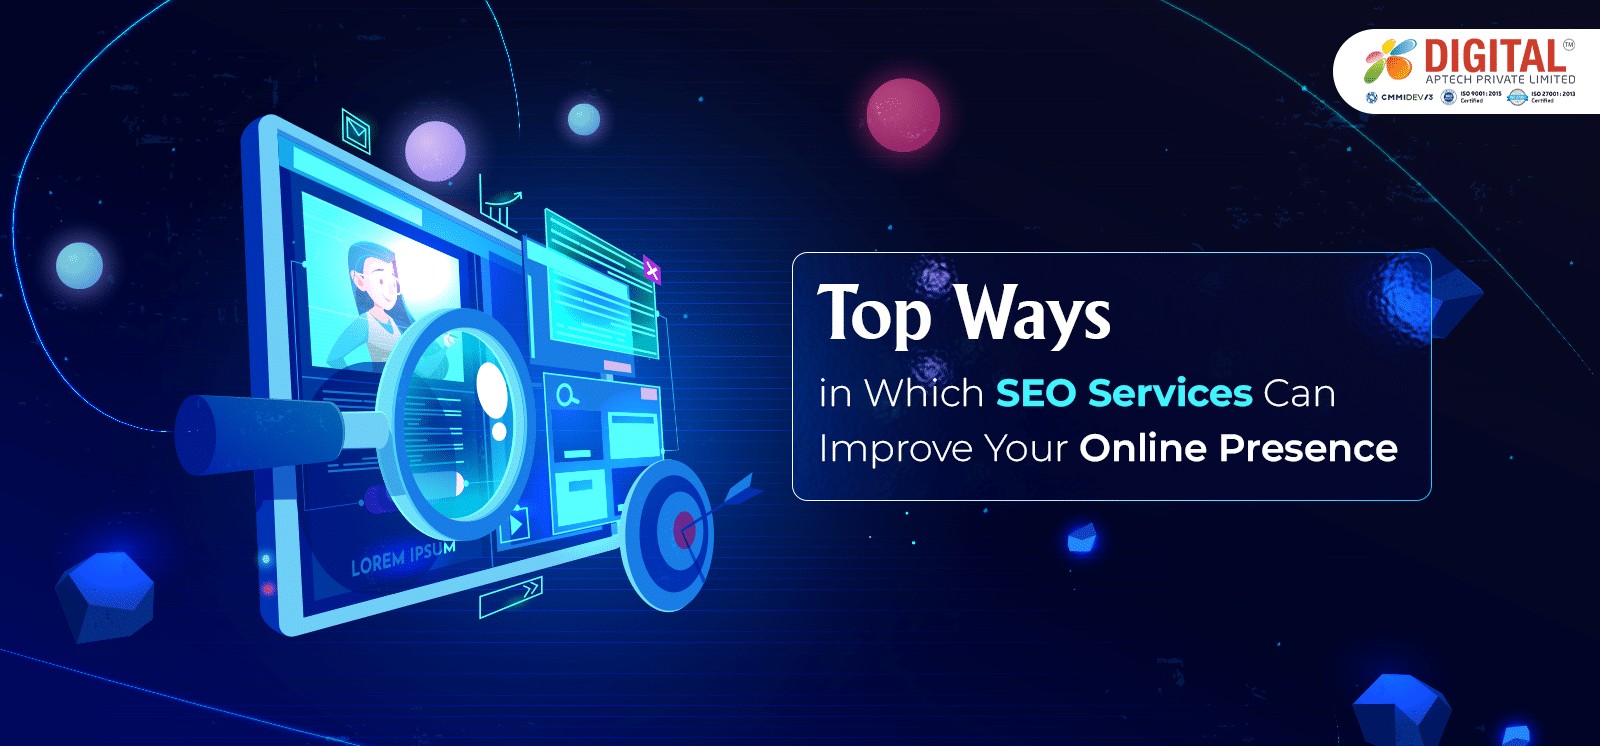 Top Ways in Which SEO Services Can Improve Your Online Presence